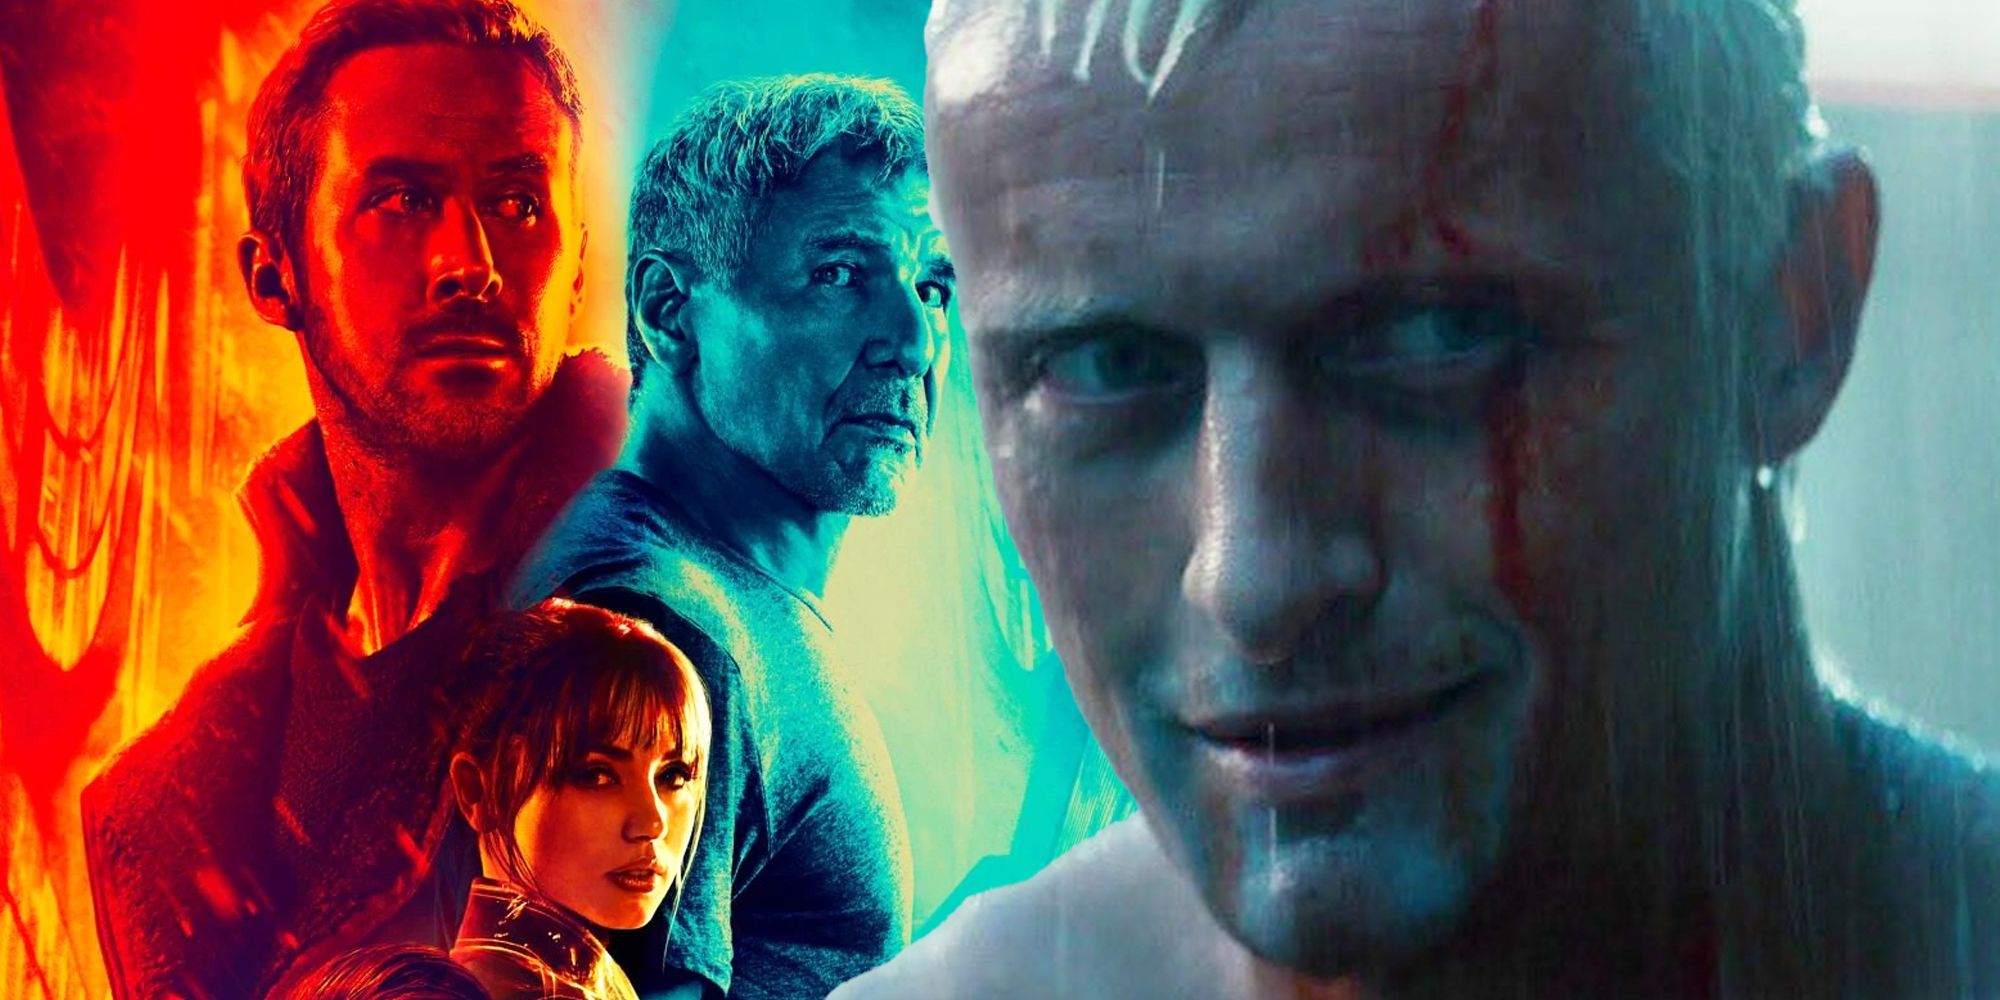 Roy Batty and the Blade Runner 2049 poster